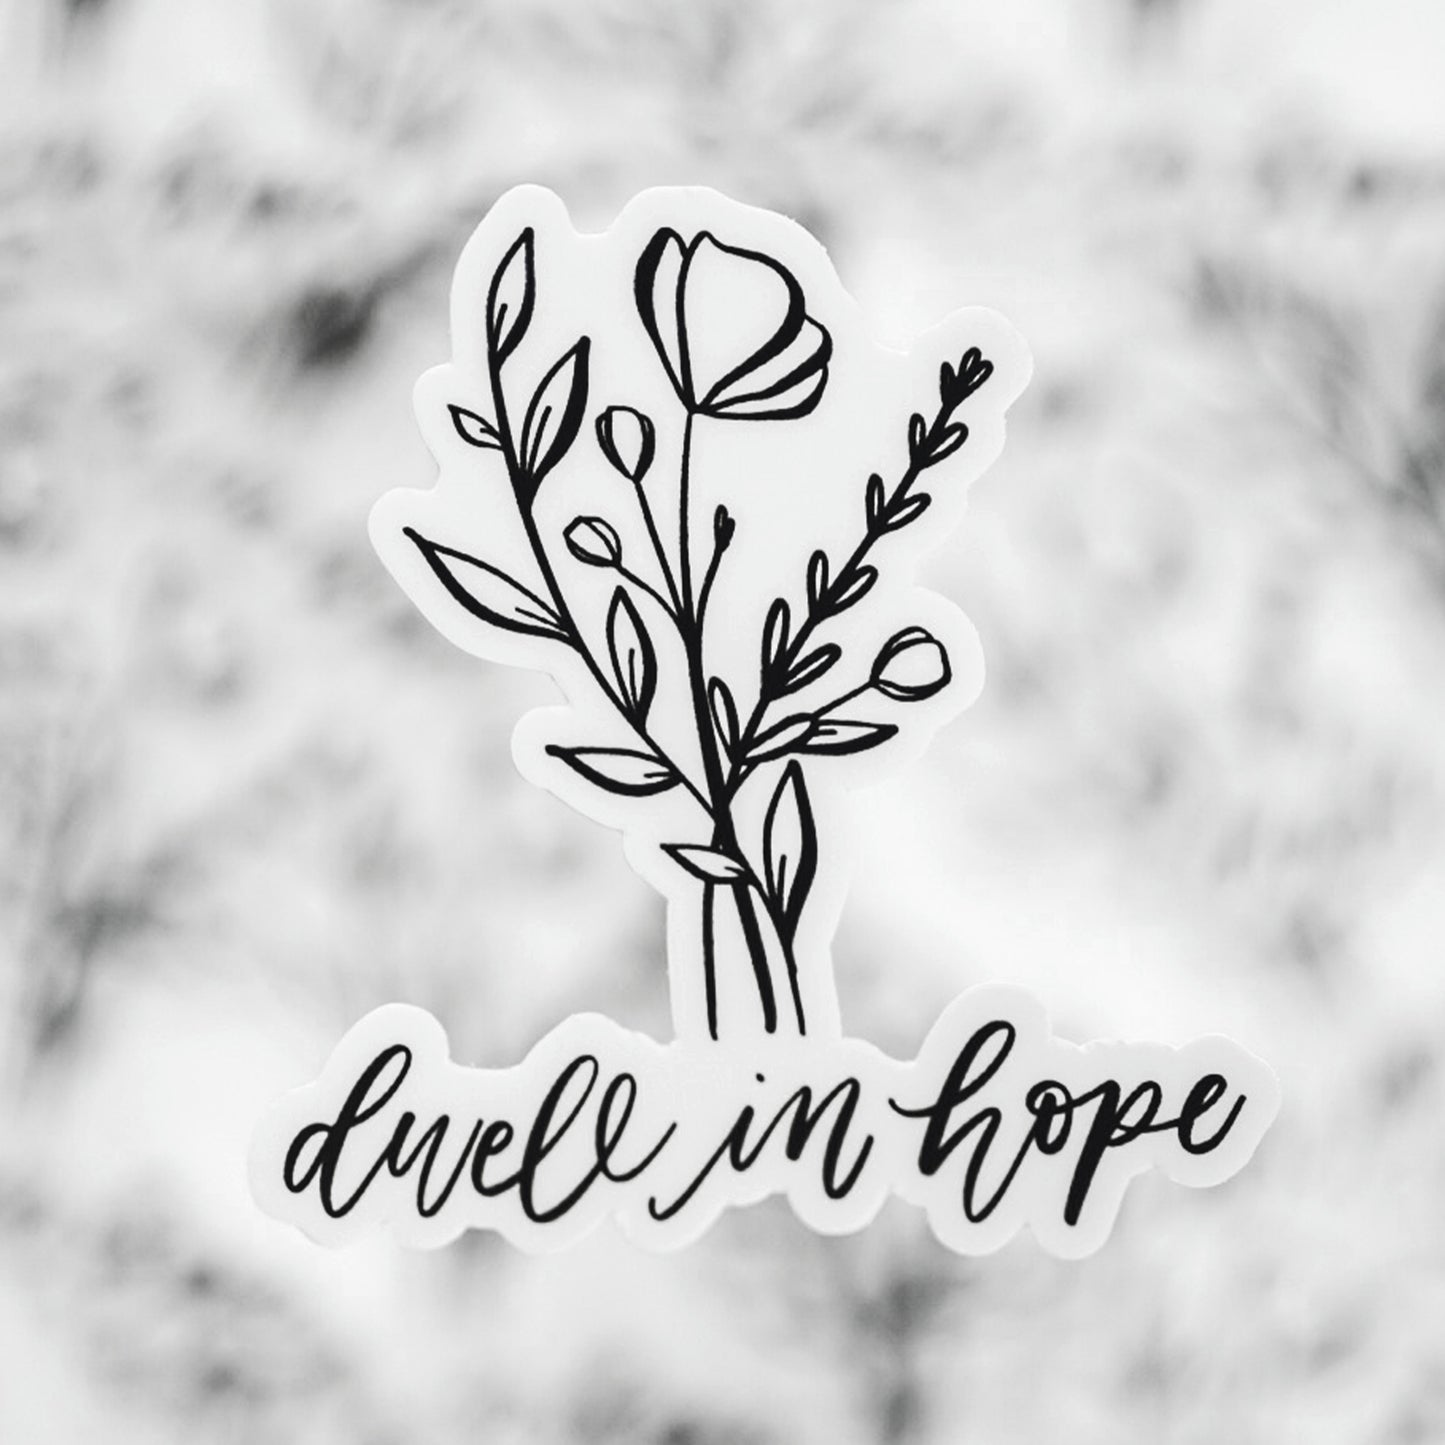 Dwell In Hope